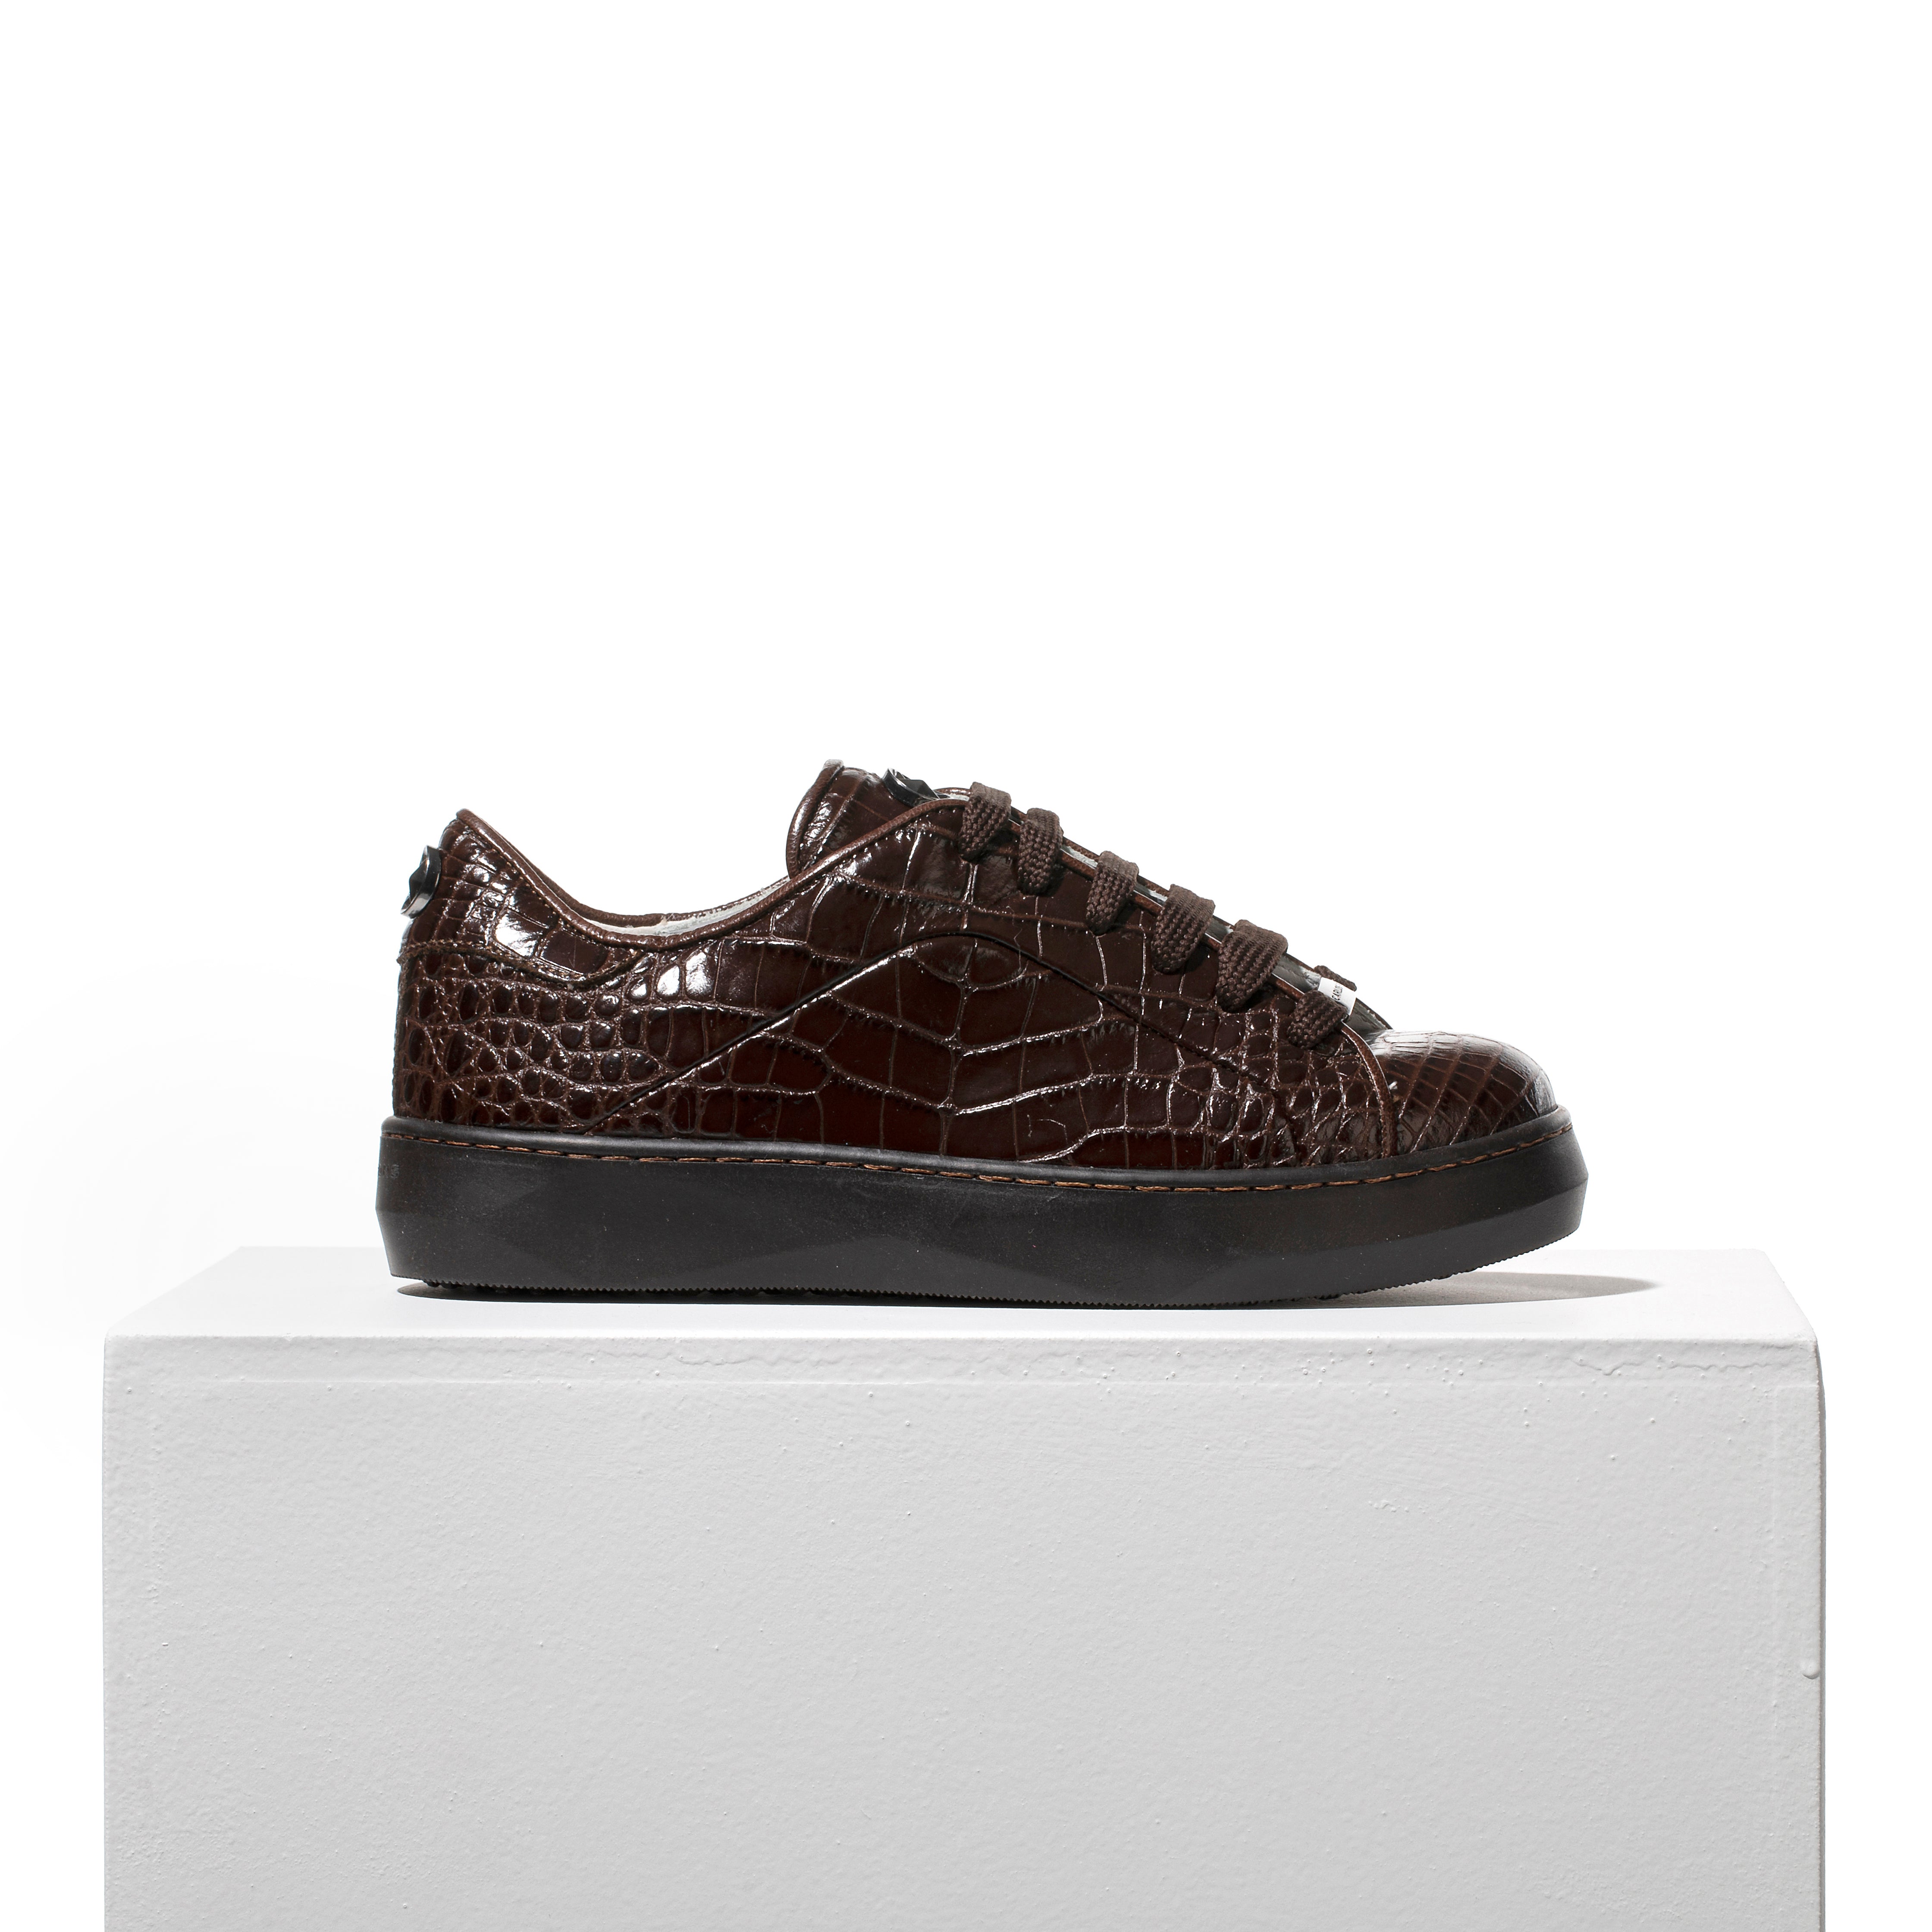 MOTHER OF PEARL MAHOGANY SNEAKER